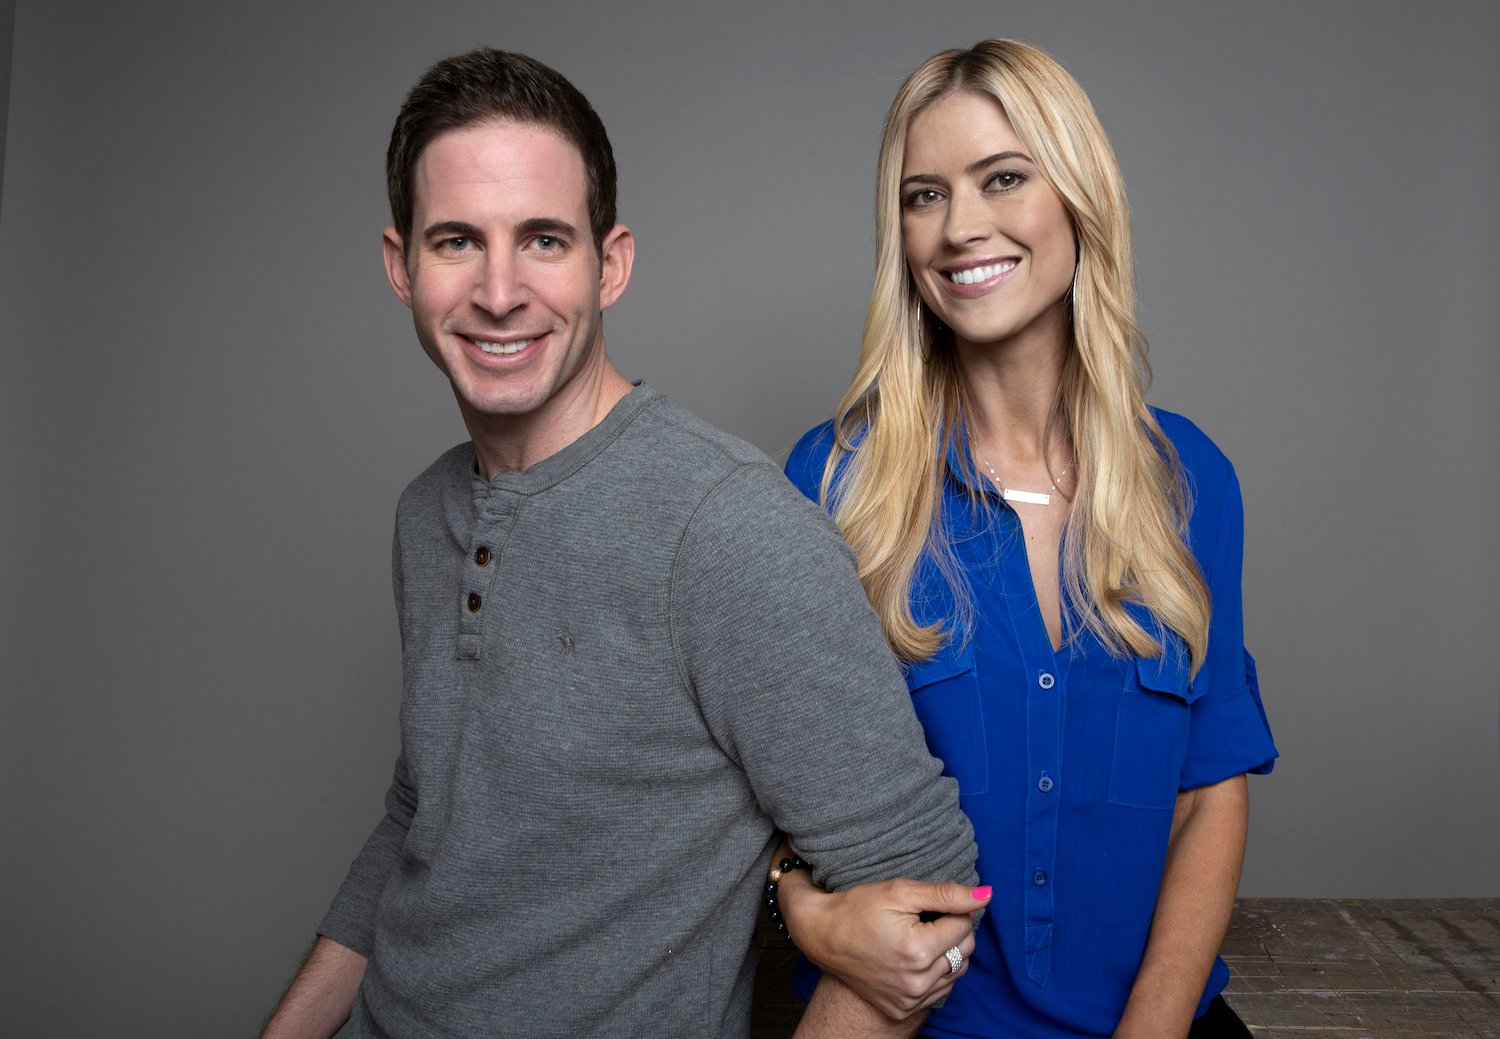 Tarek El Moussa and Christina Haack smiling for a promo still for 'Flip or Flop' in 2017